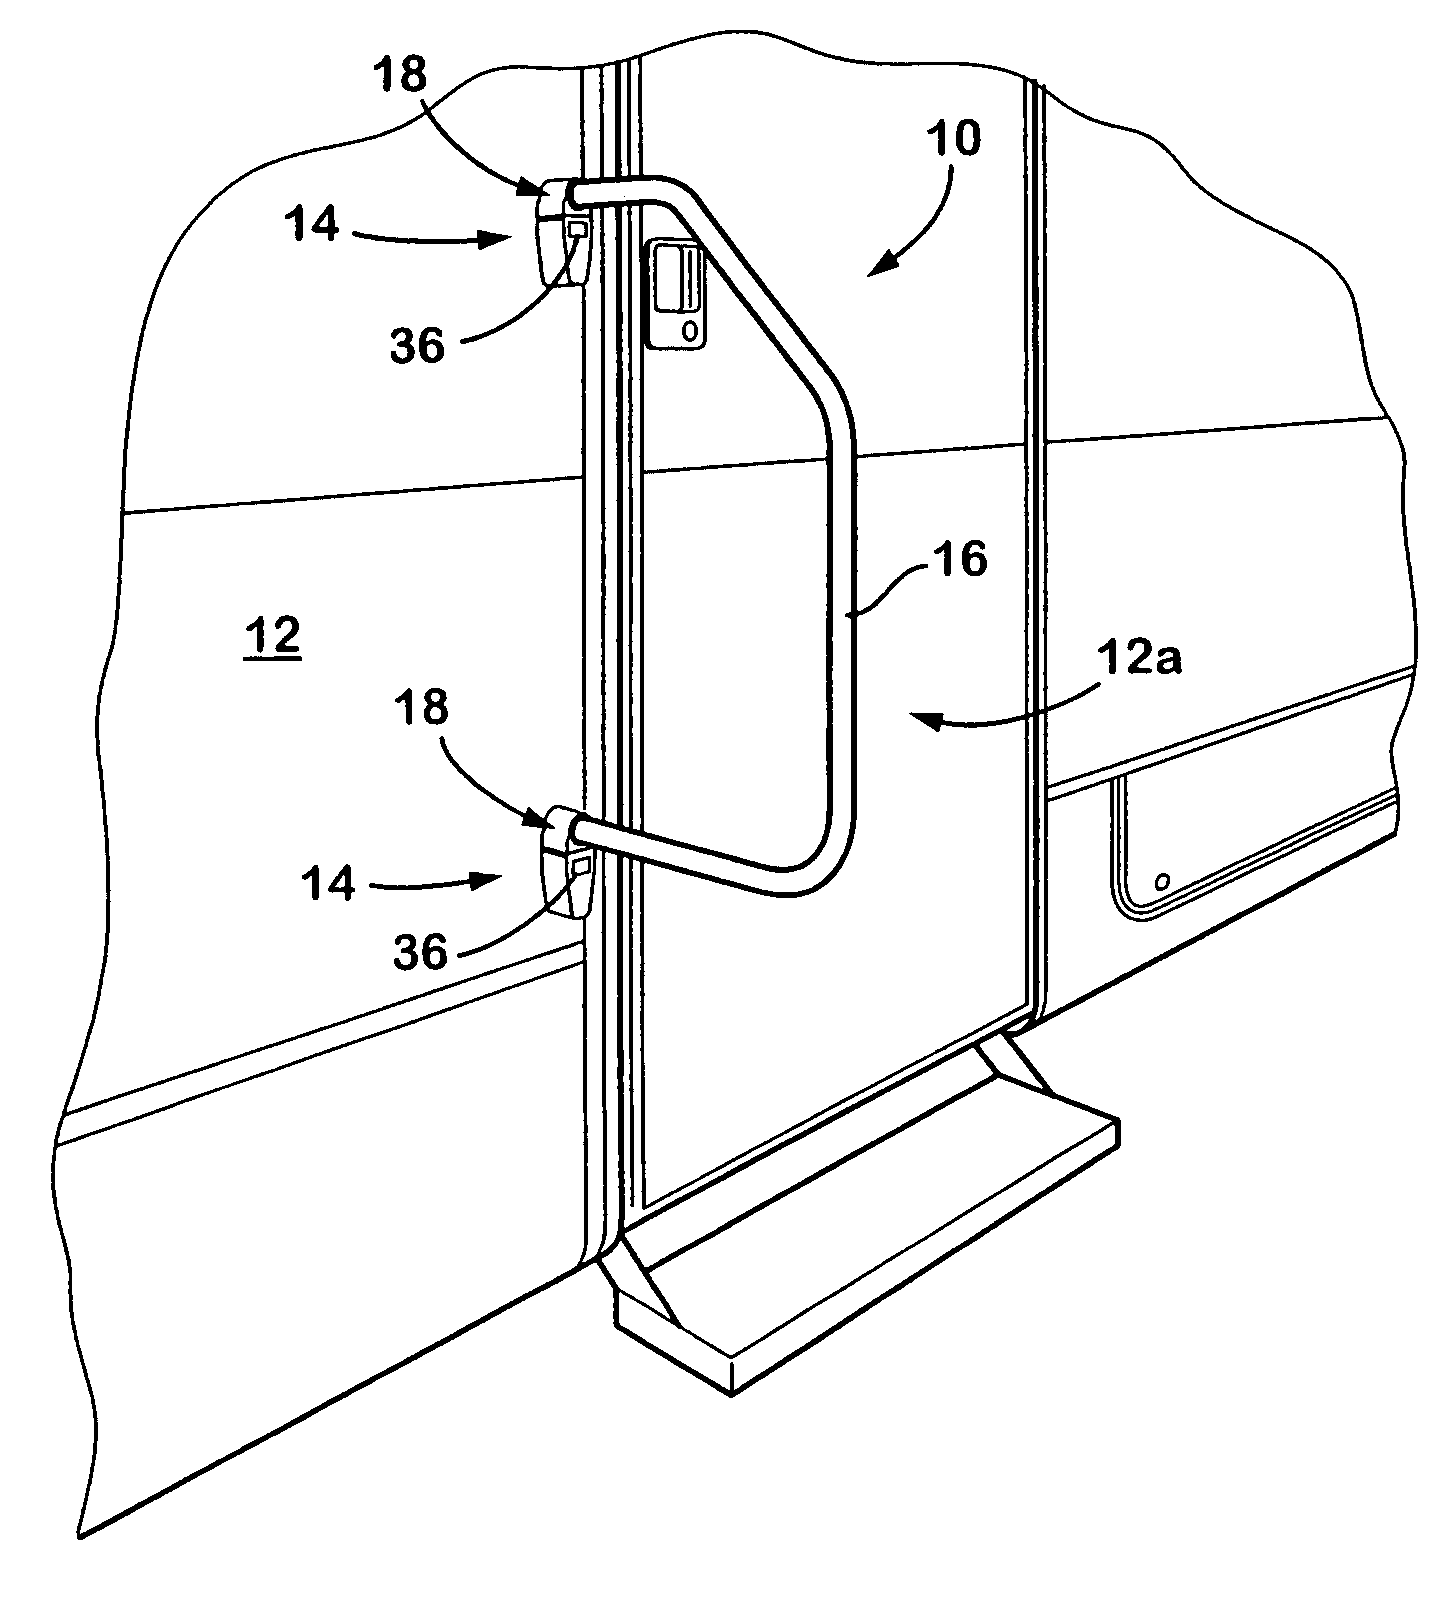 Folding handle assembly for a vehicle